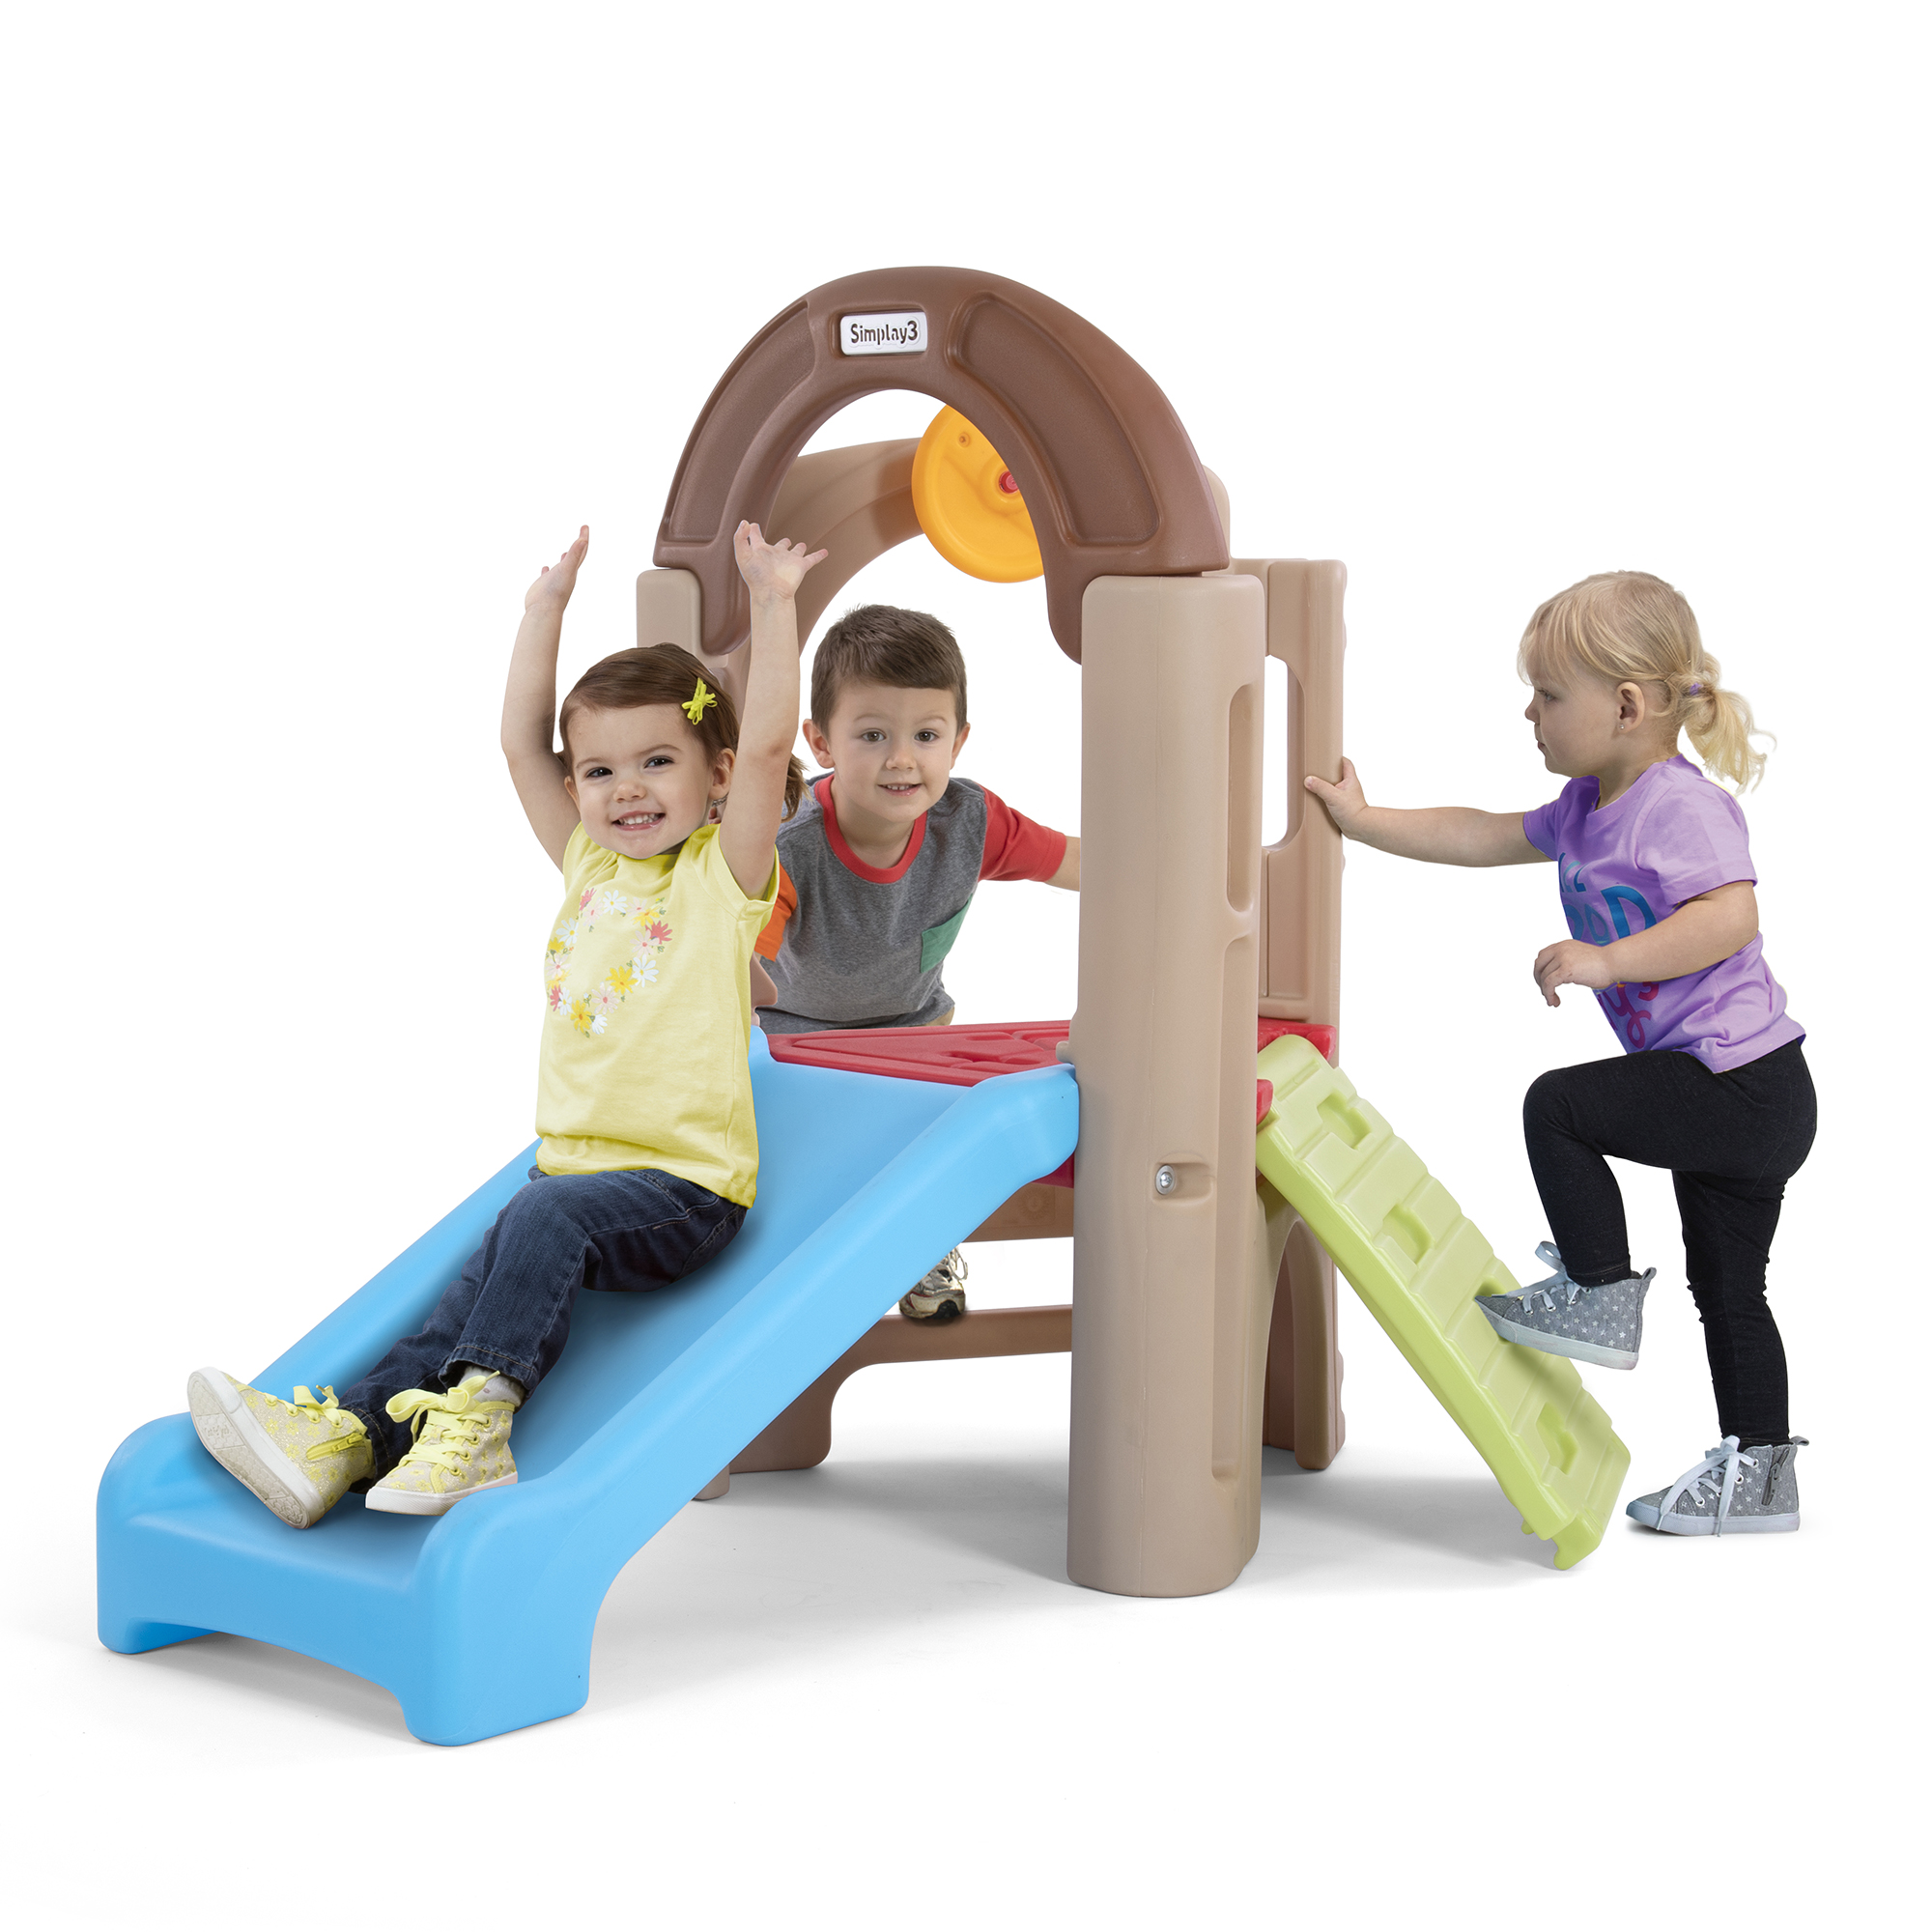 Young Explorers Indoor and outdoor activity climber for toddlers, my fist playset by simplay3